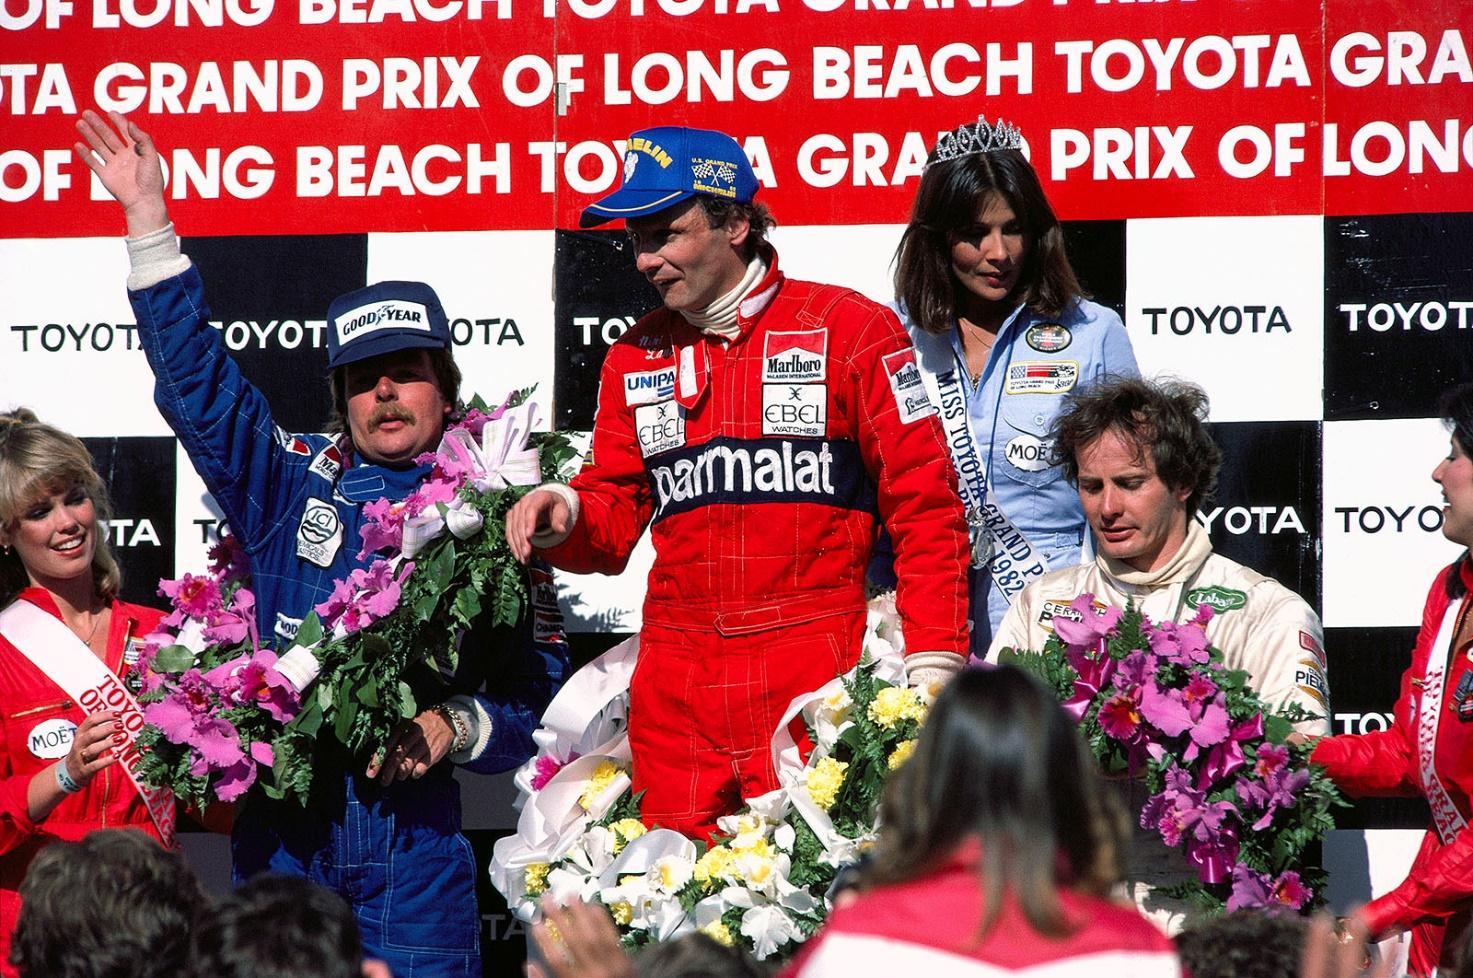 Long Beach 1982. Keke Rosberg, Niki Lauda (middle) and Gilles Villeneuve are the top three drivers on the podium. Lauda won his 1st GP just three races after his comeback in F1 that season.